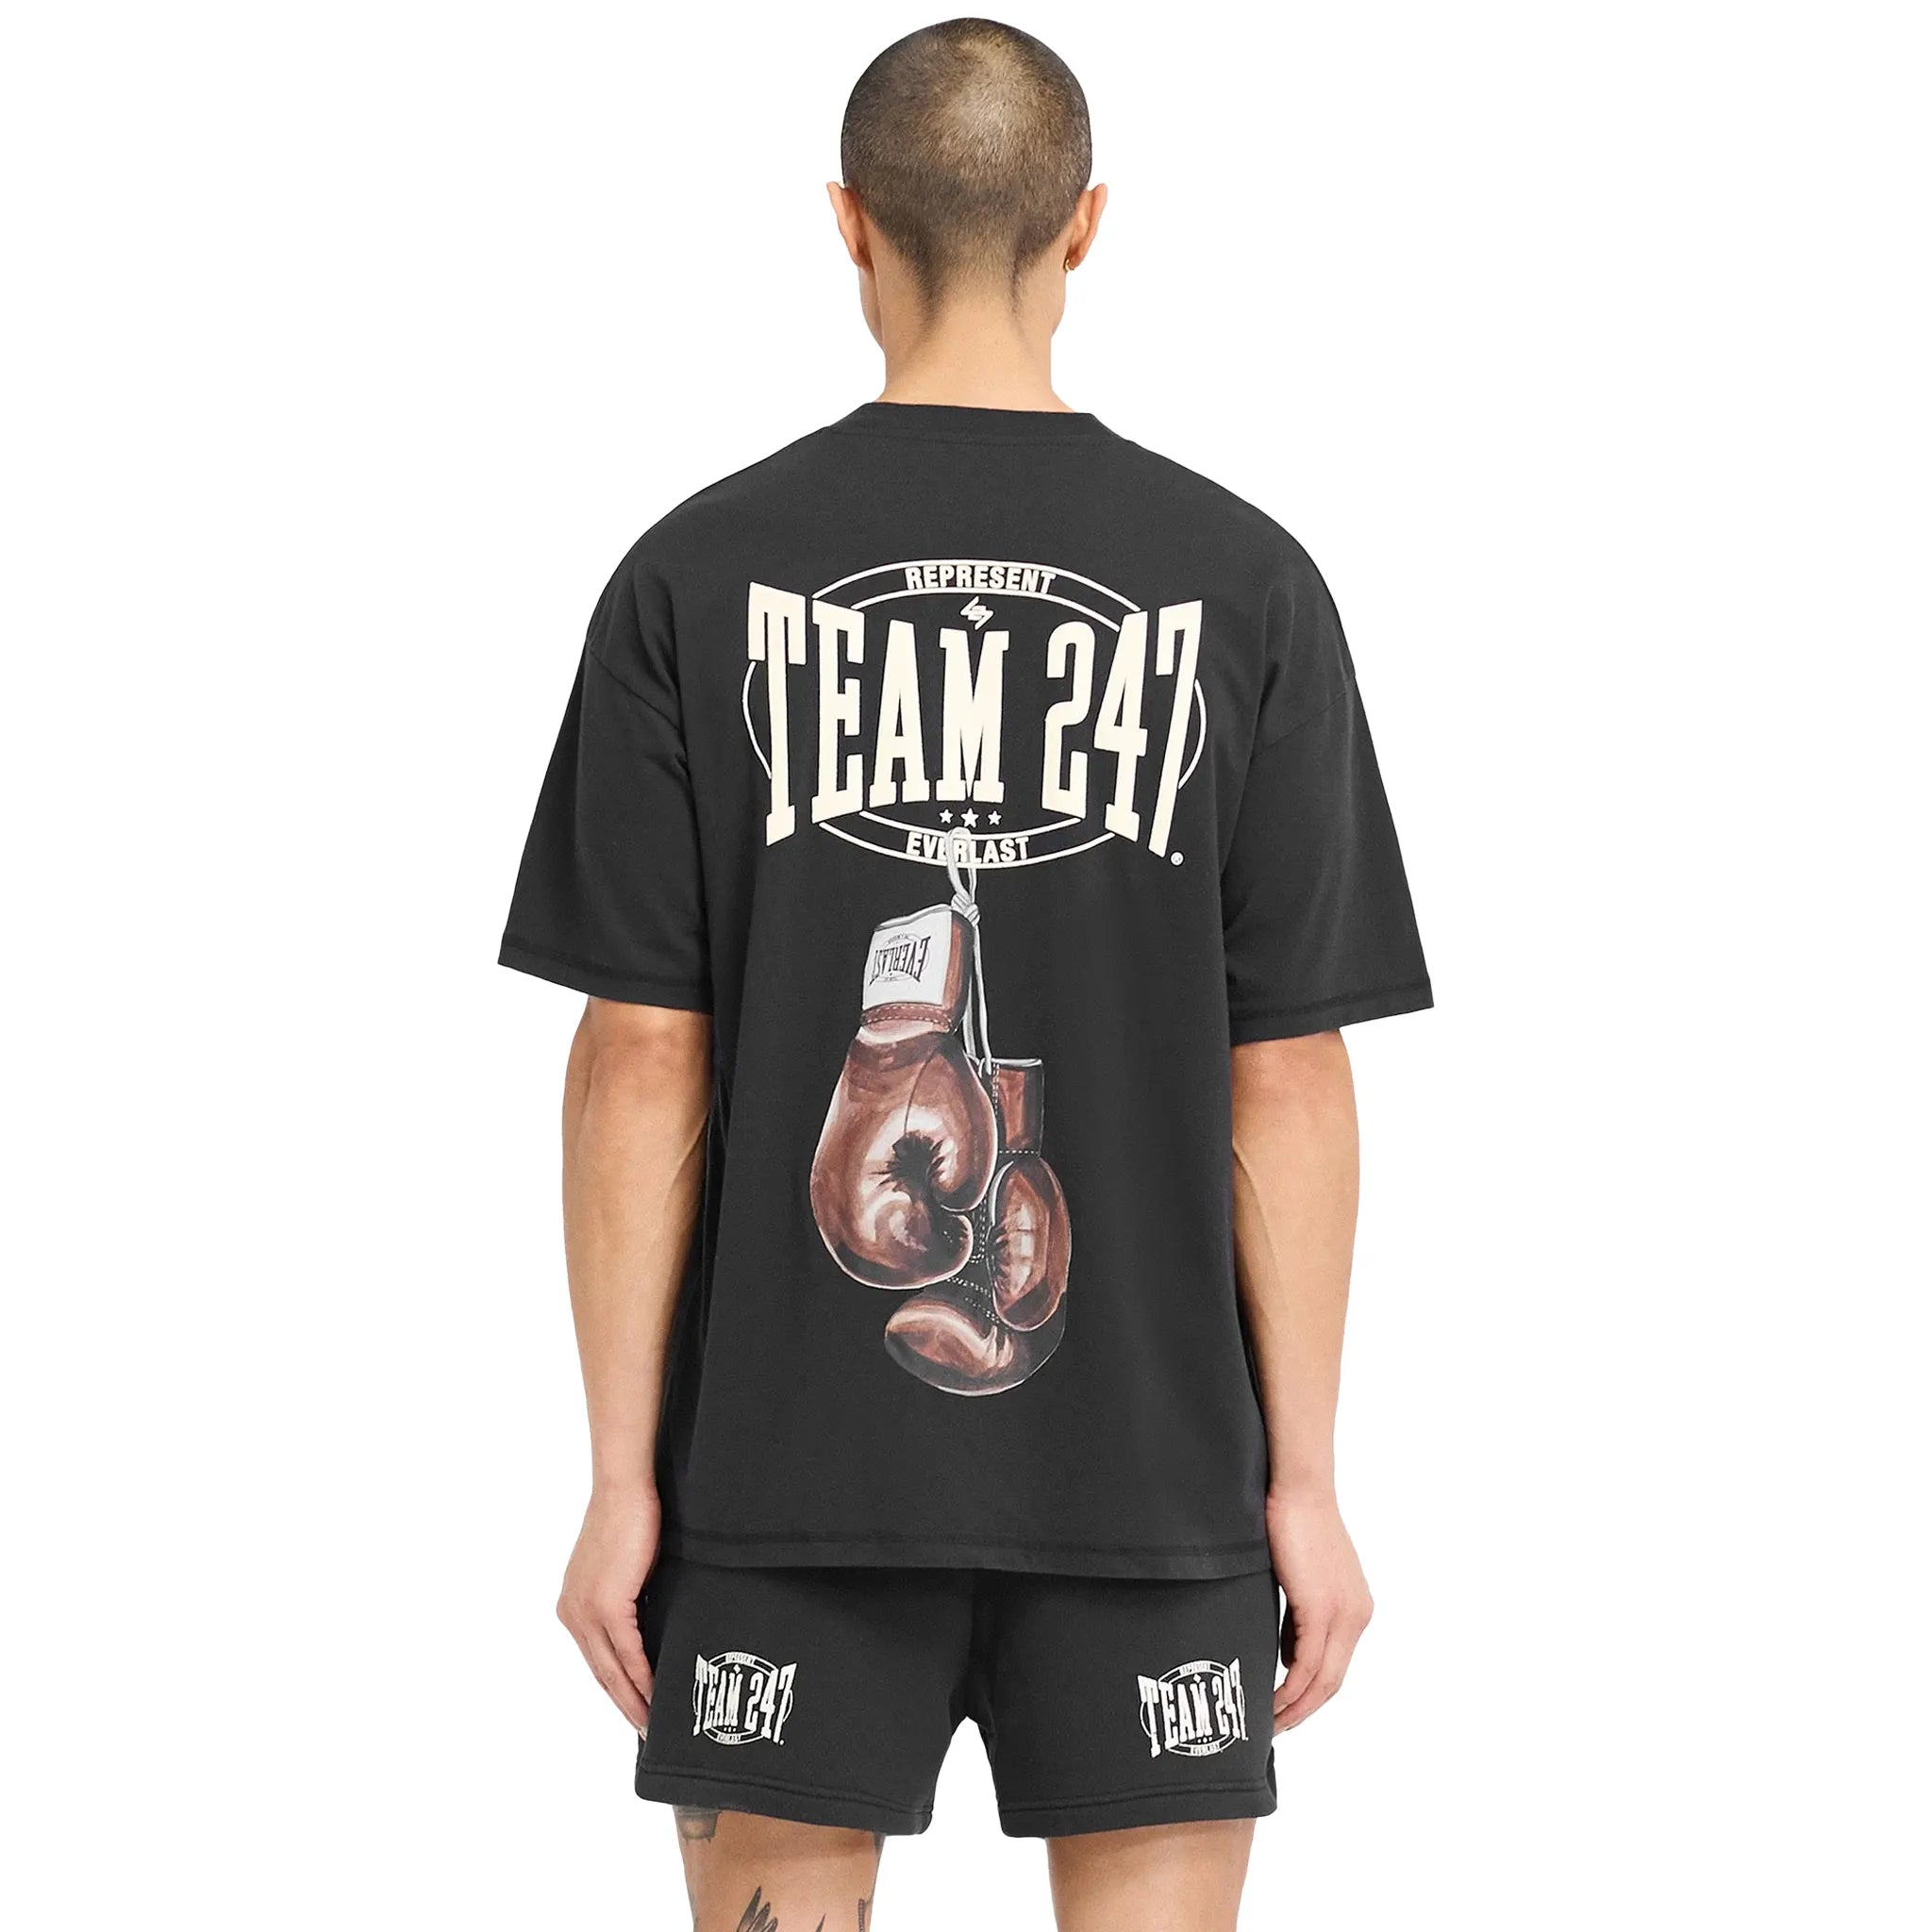 Back Detail view of Represent 247 X Everlast Training Camp Off Black T Shirt 247M482-171